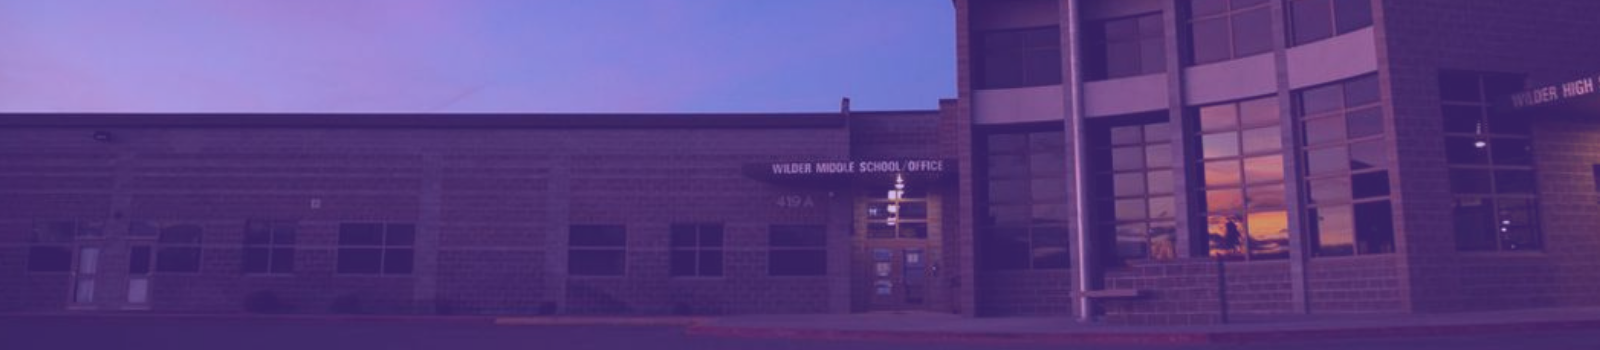 Photo of wilder middle high school at dusk